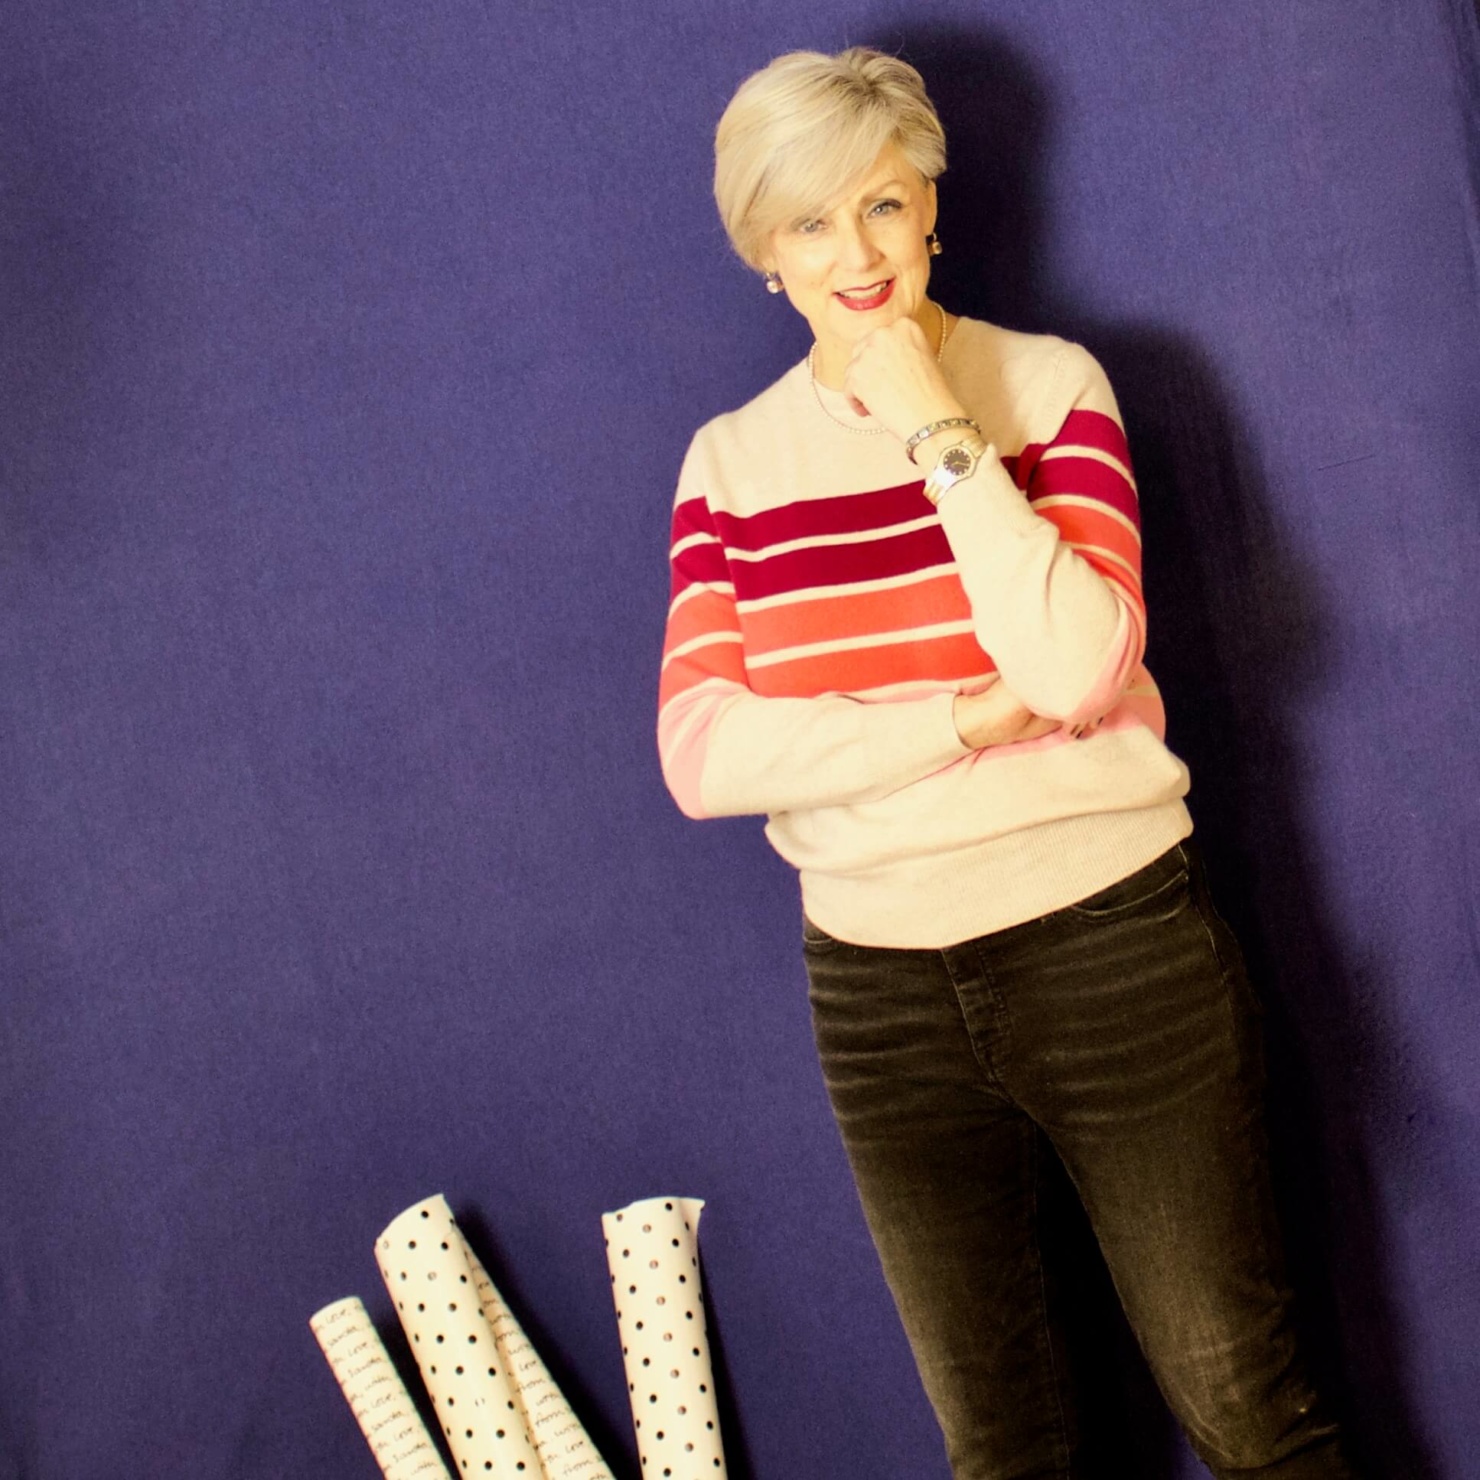 beth from Style at a Certain Age wears a striped cashmere crewneck from Marks & Spencer